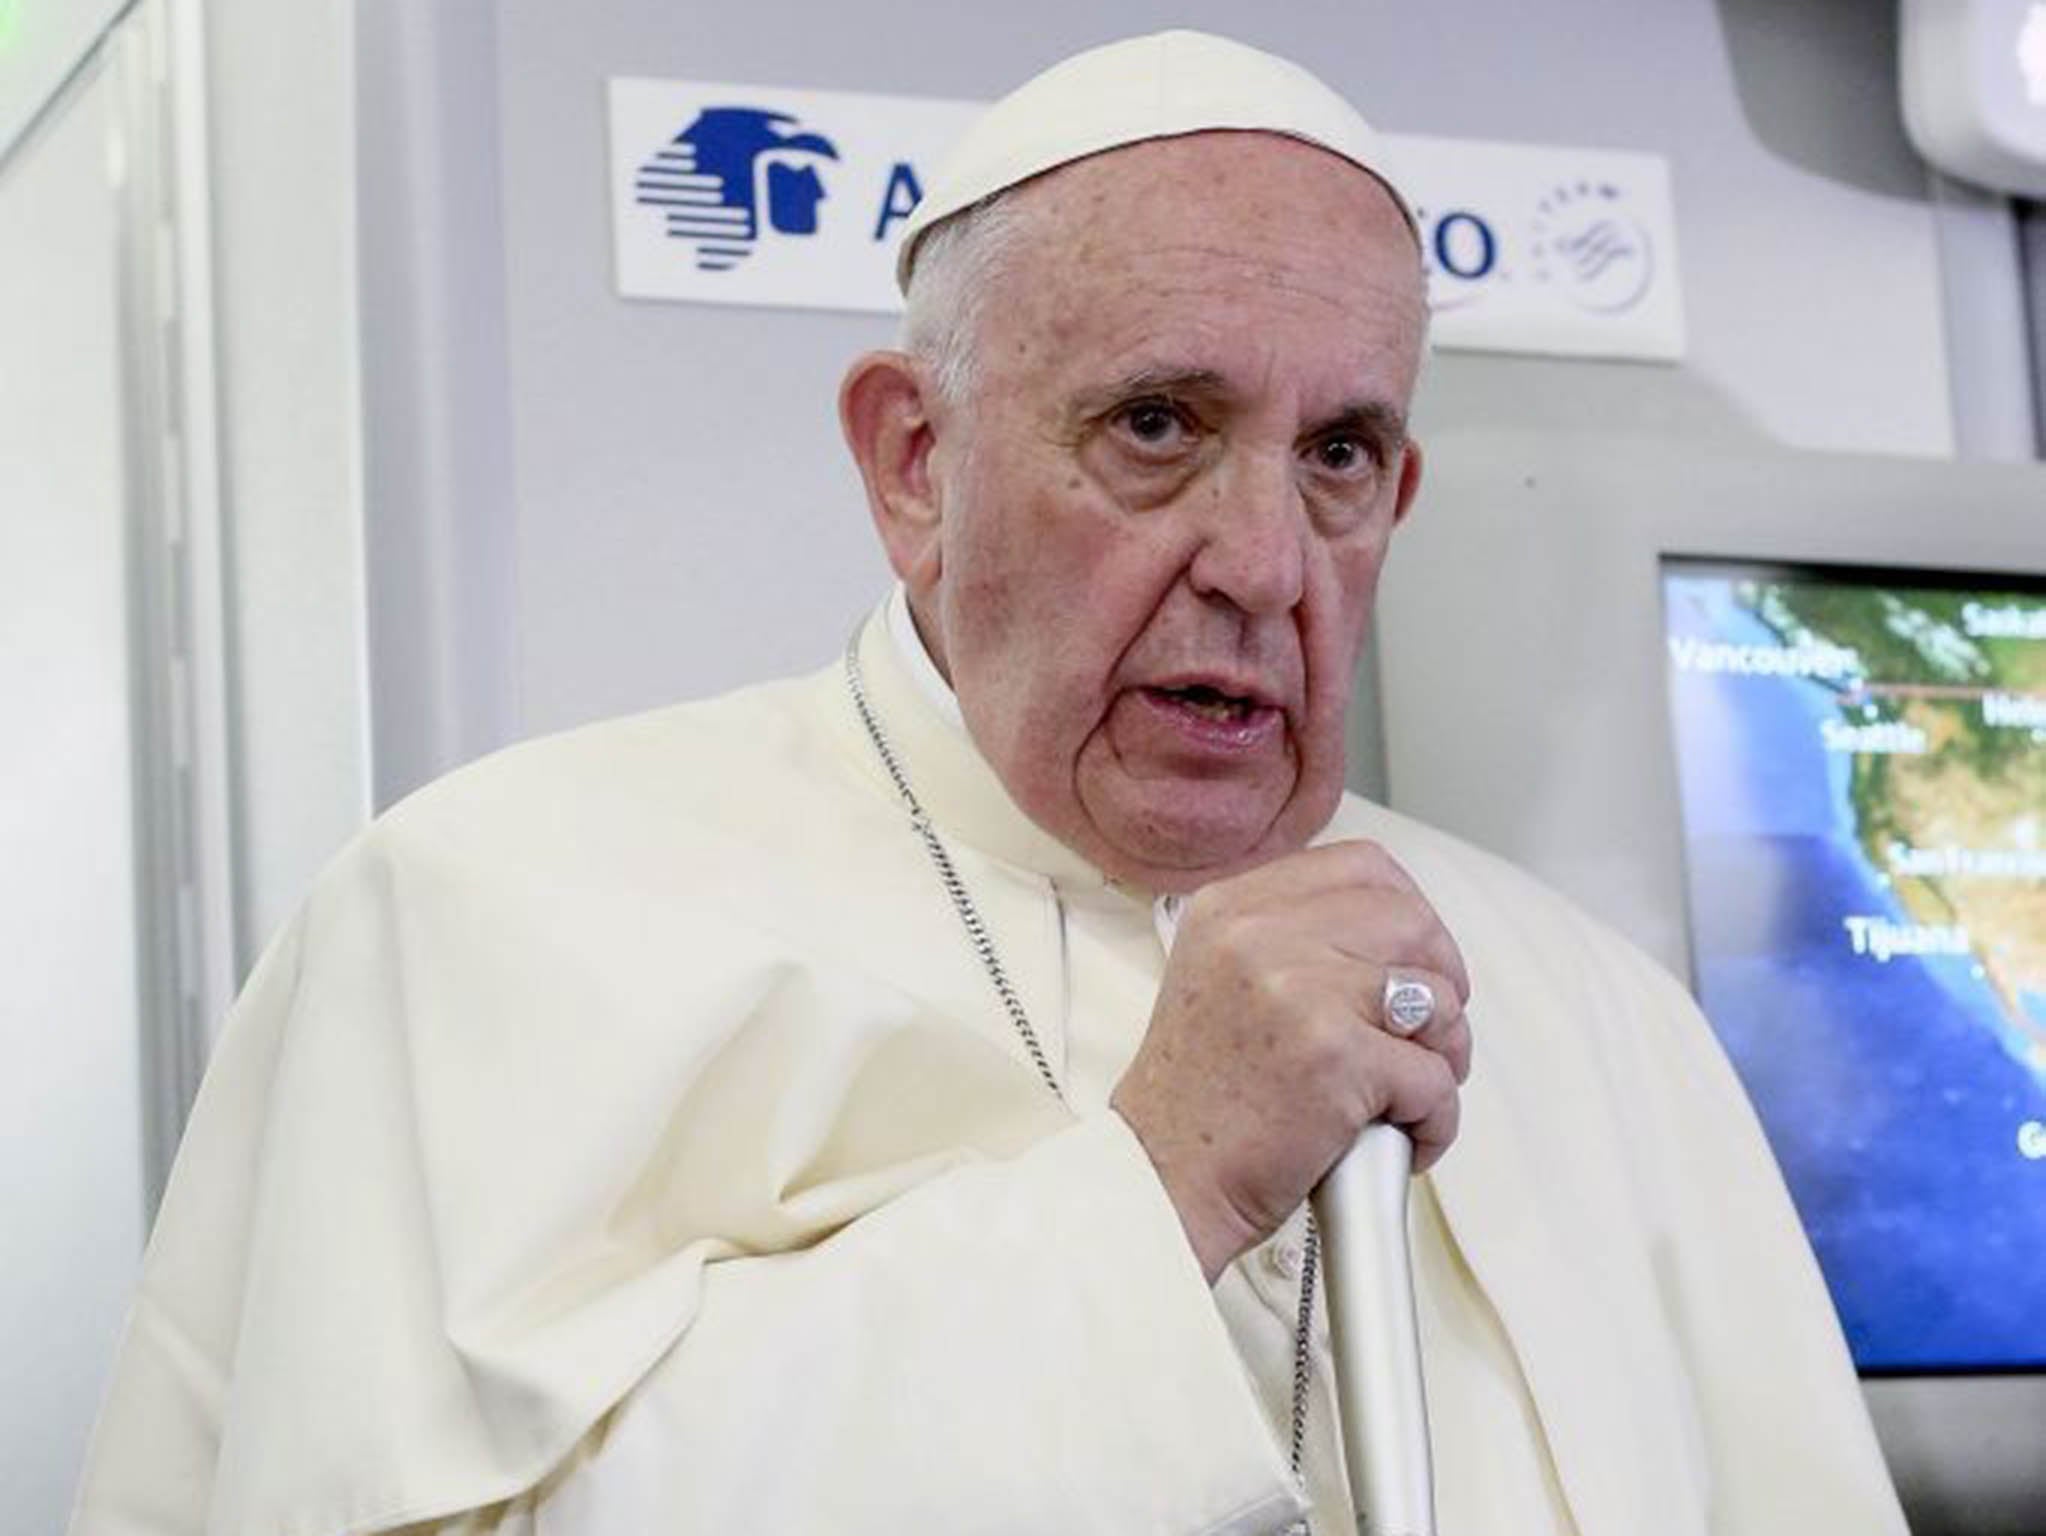 Pope Francis urged Catholic leaders not to allow executions during the Holy Year